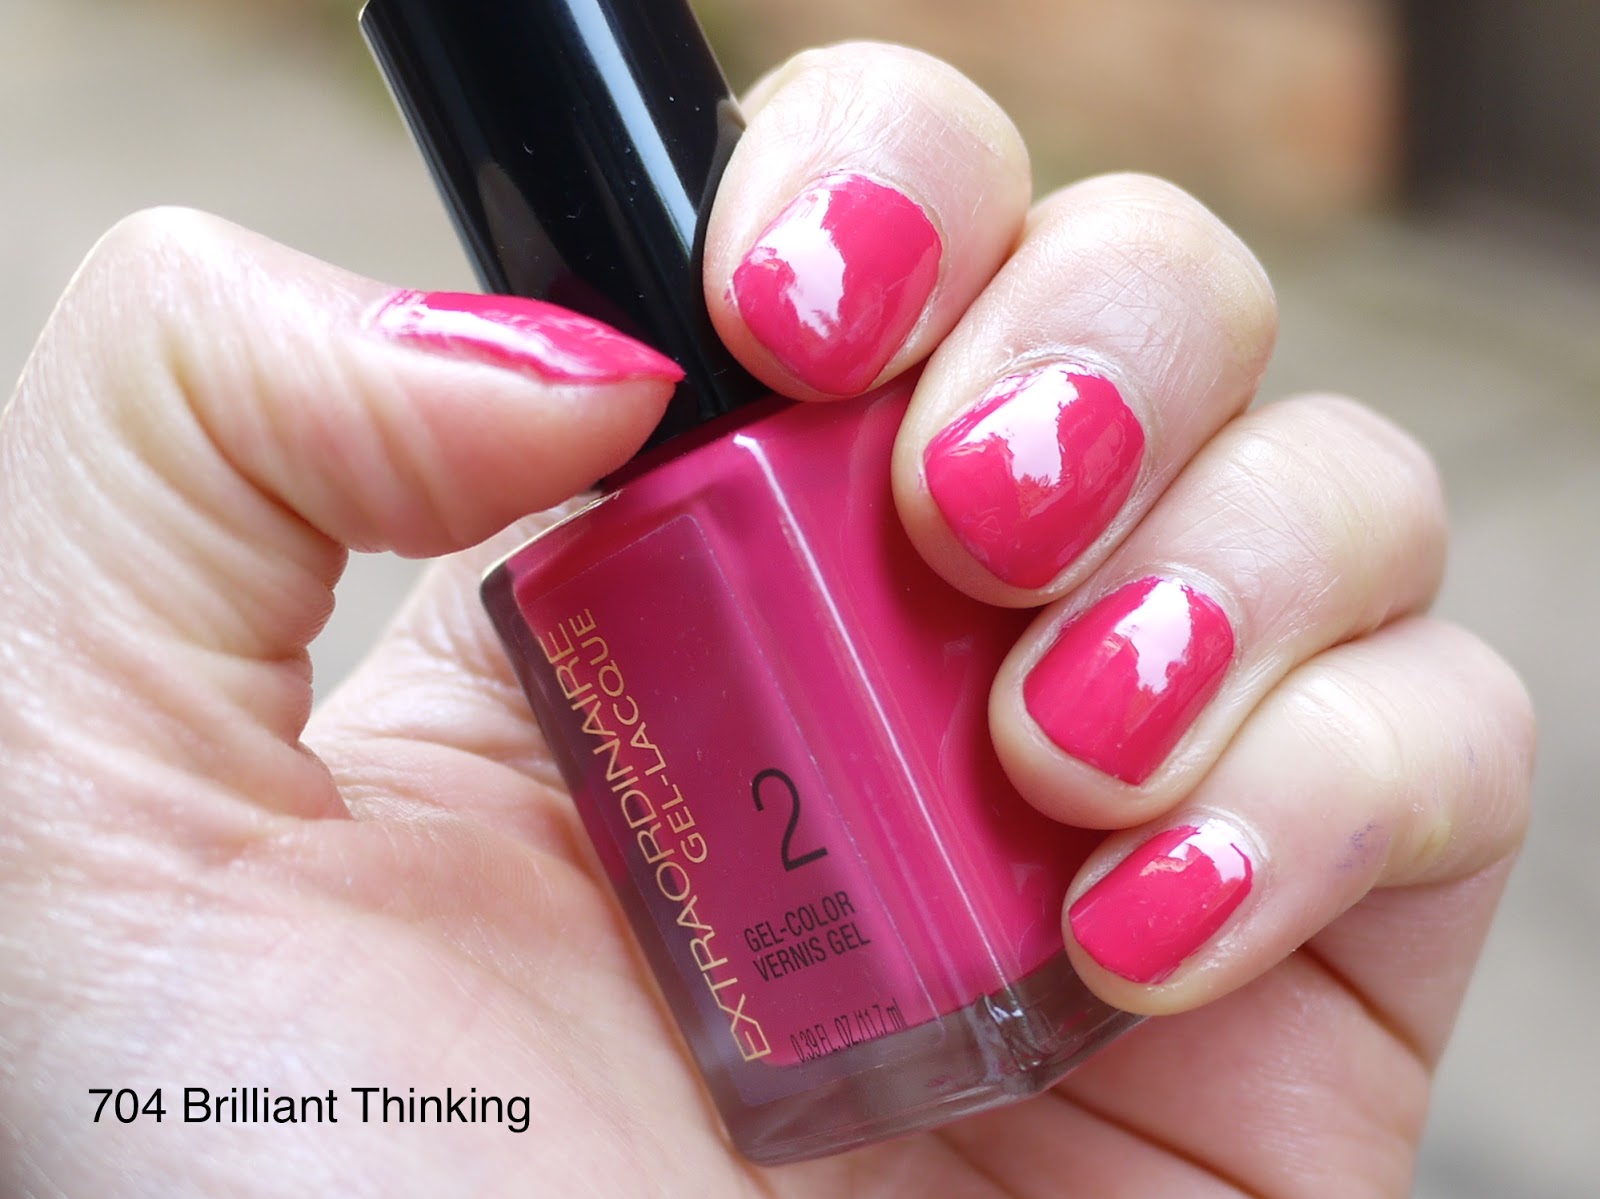 l'oreal extraordinaire gel-lacque 704 brilliant thinking nail swatch